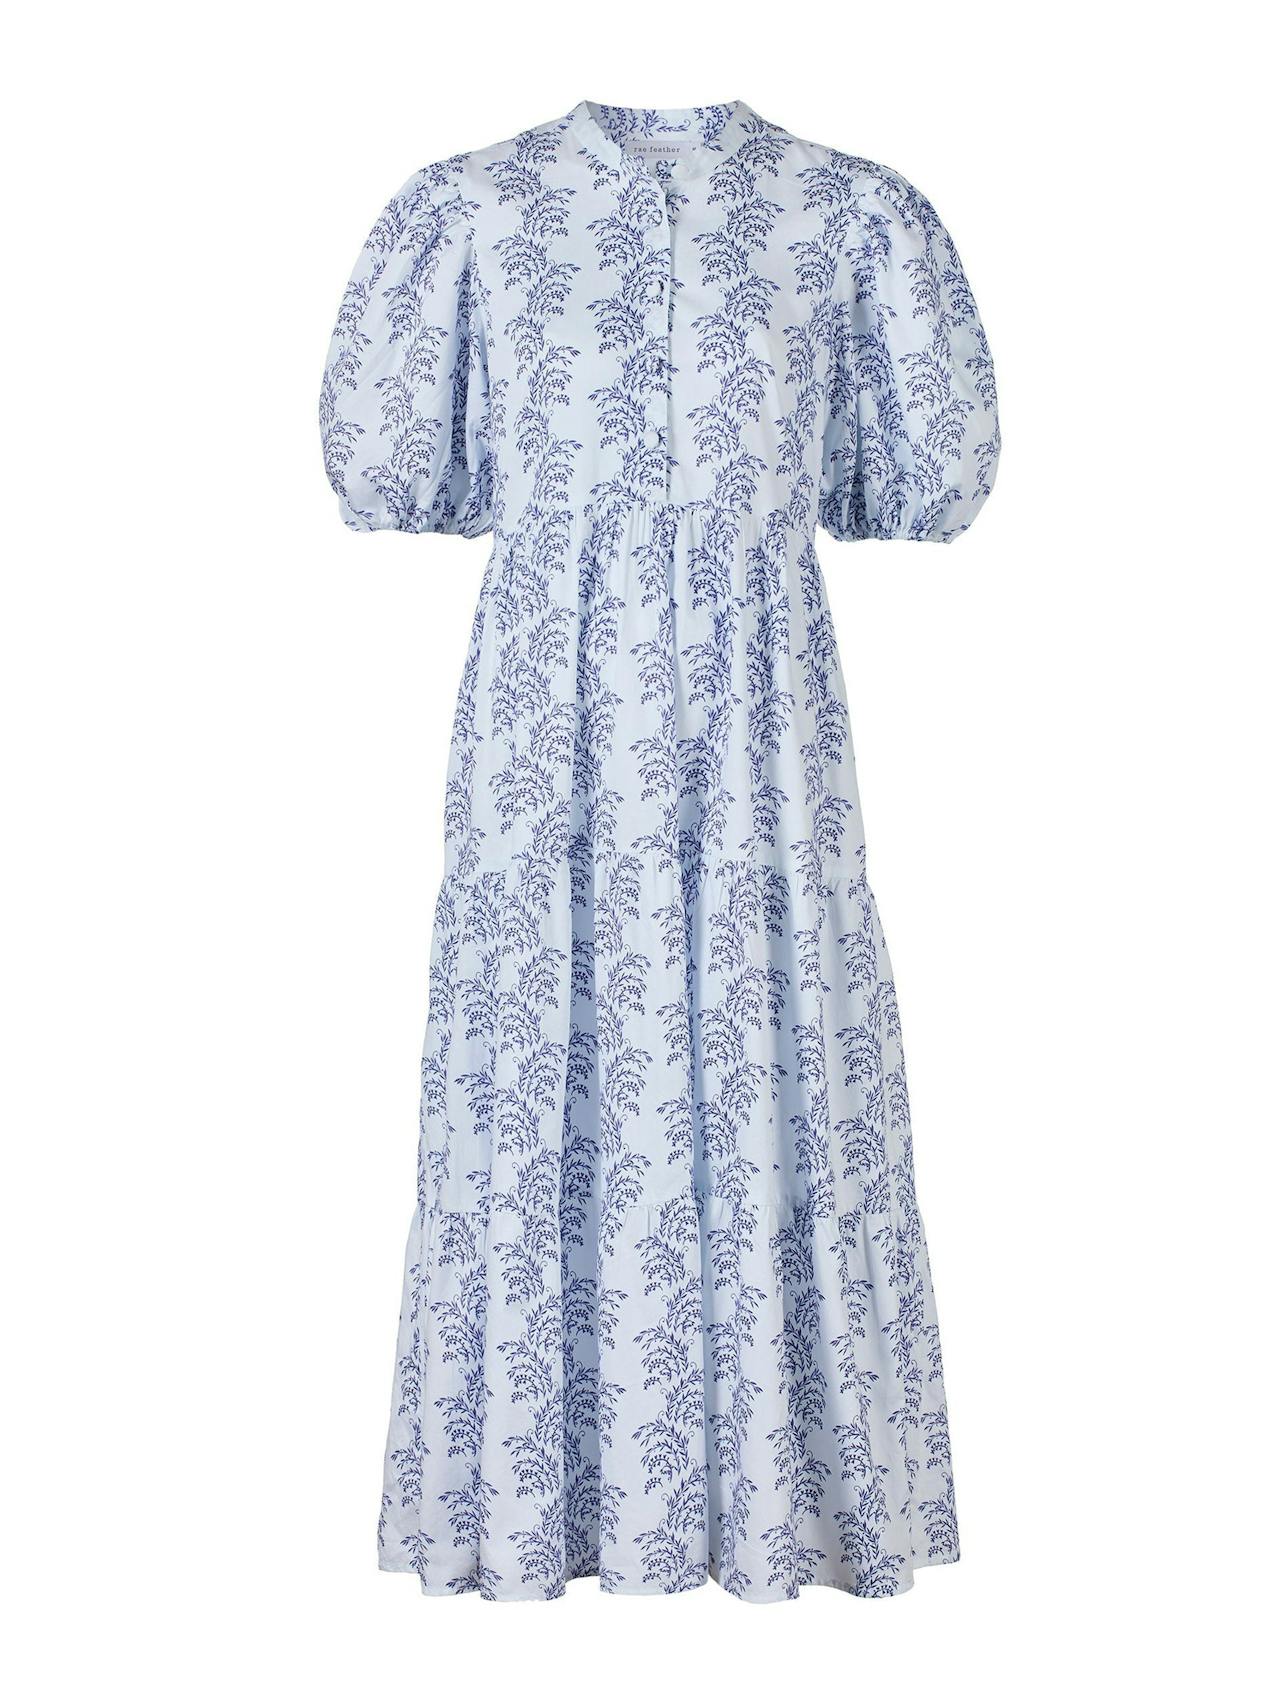 White and blue Nellie dress